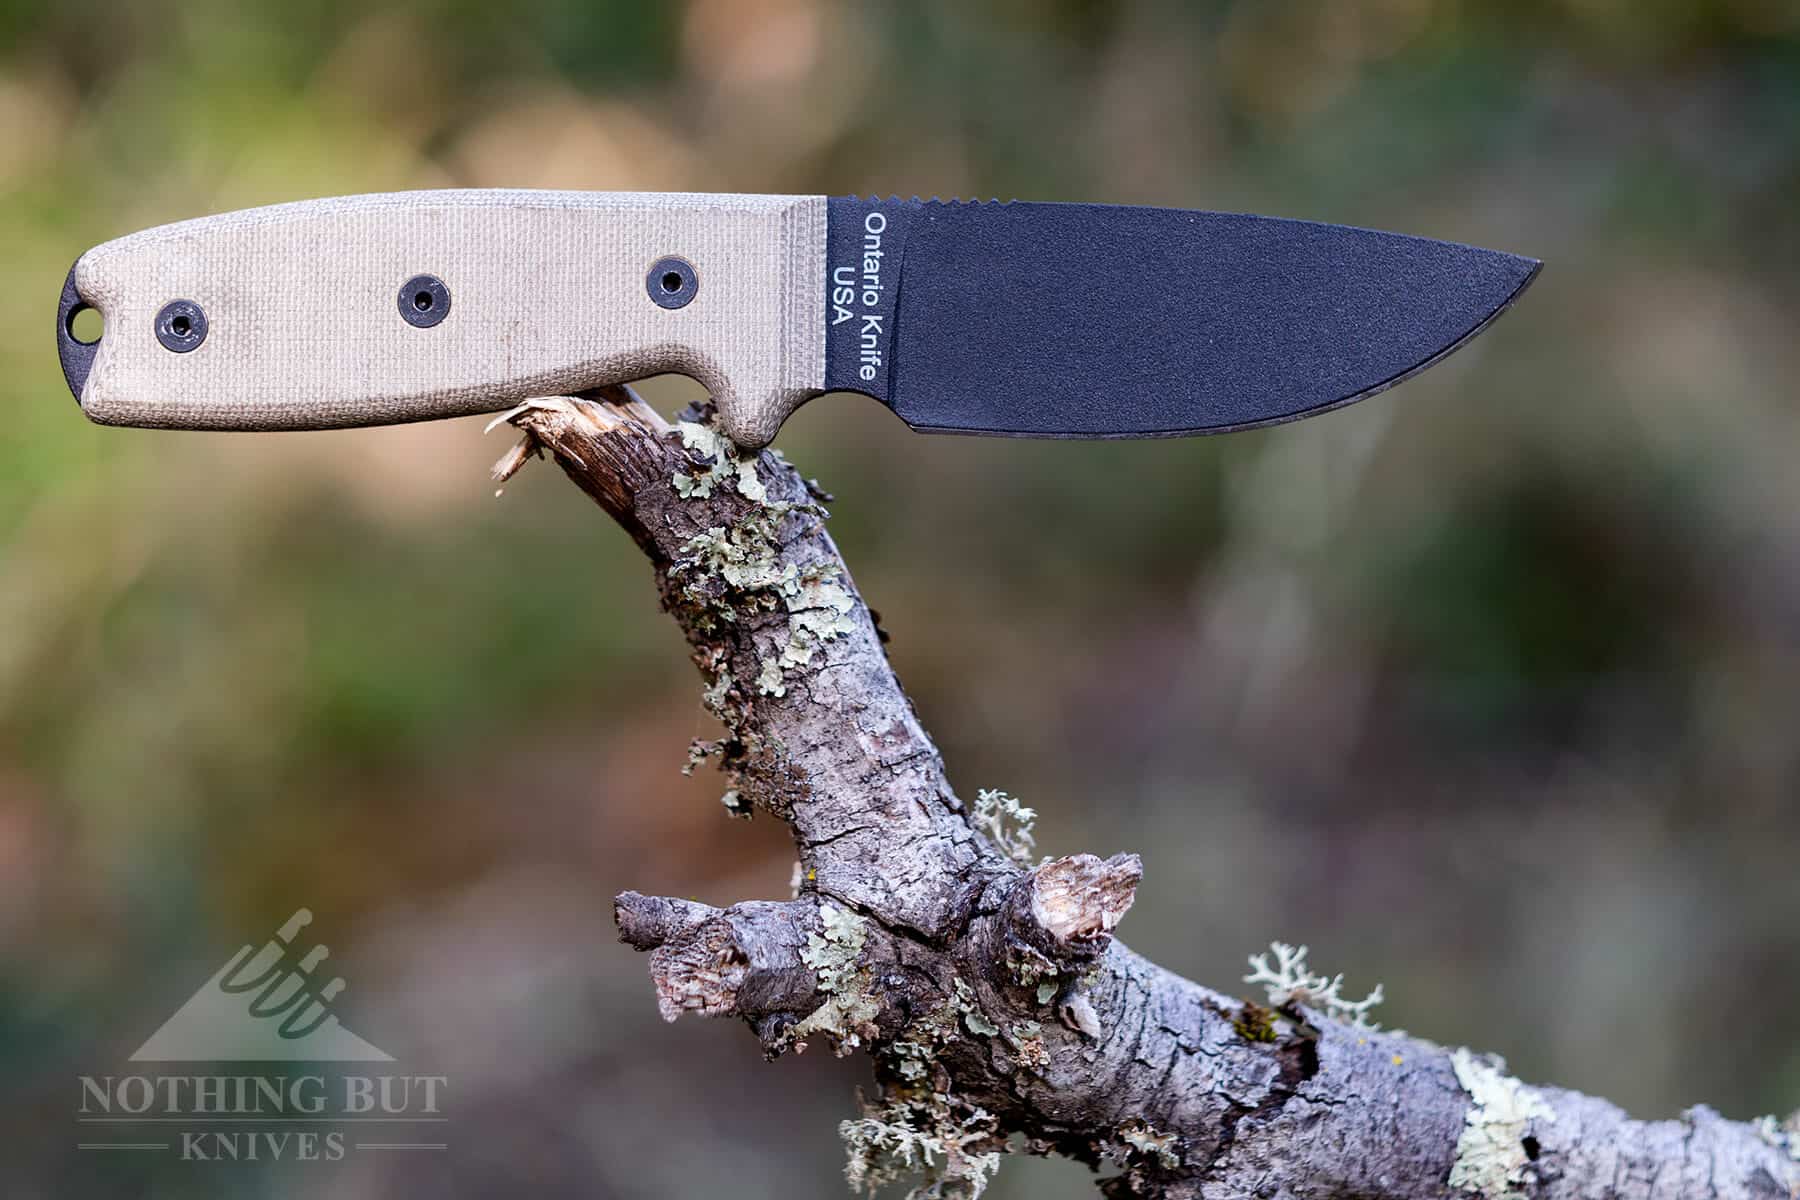 At the end of the day, the question is if this knife is worth your money. I’d have to say yes, but just barely.